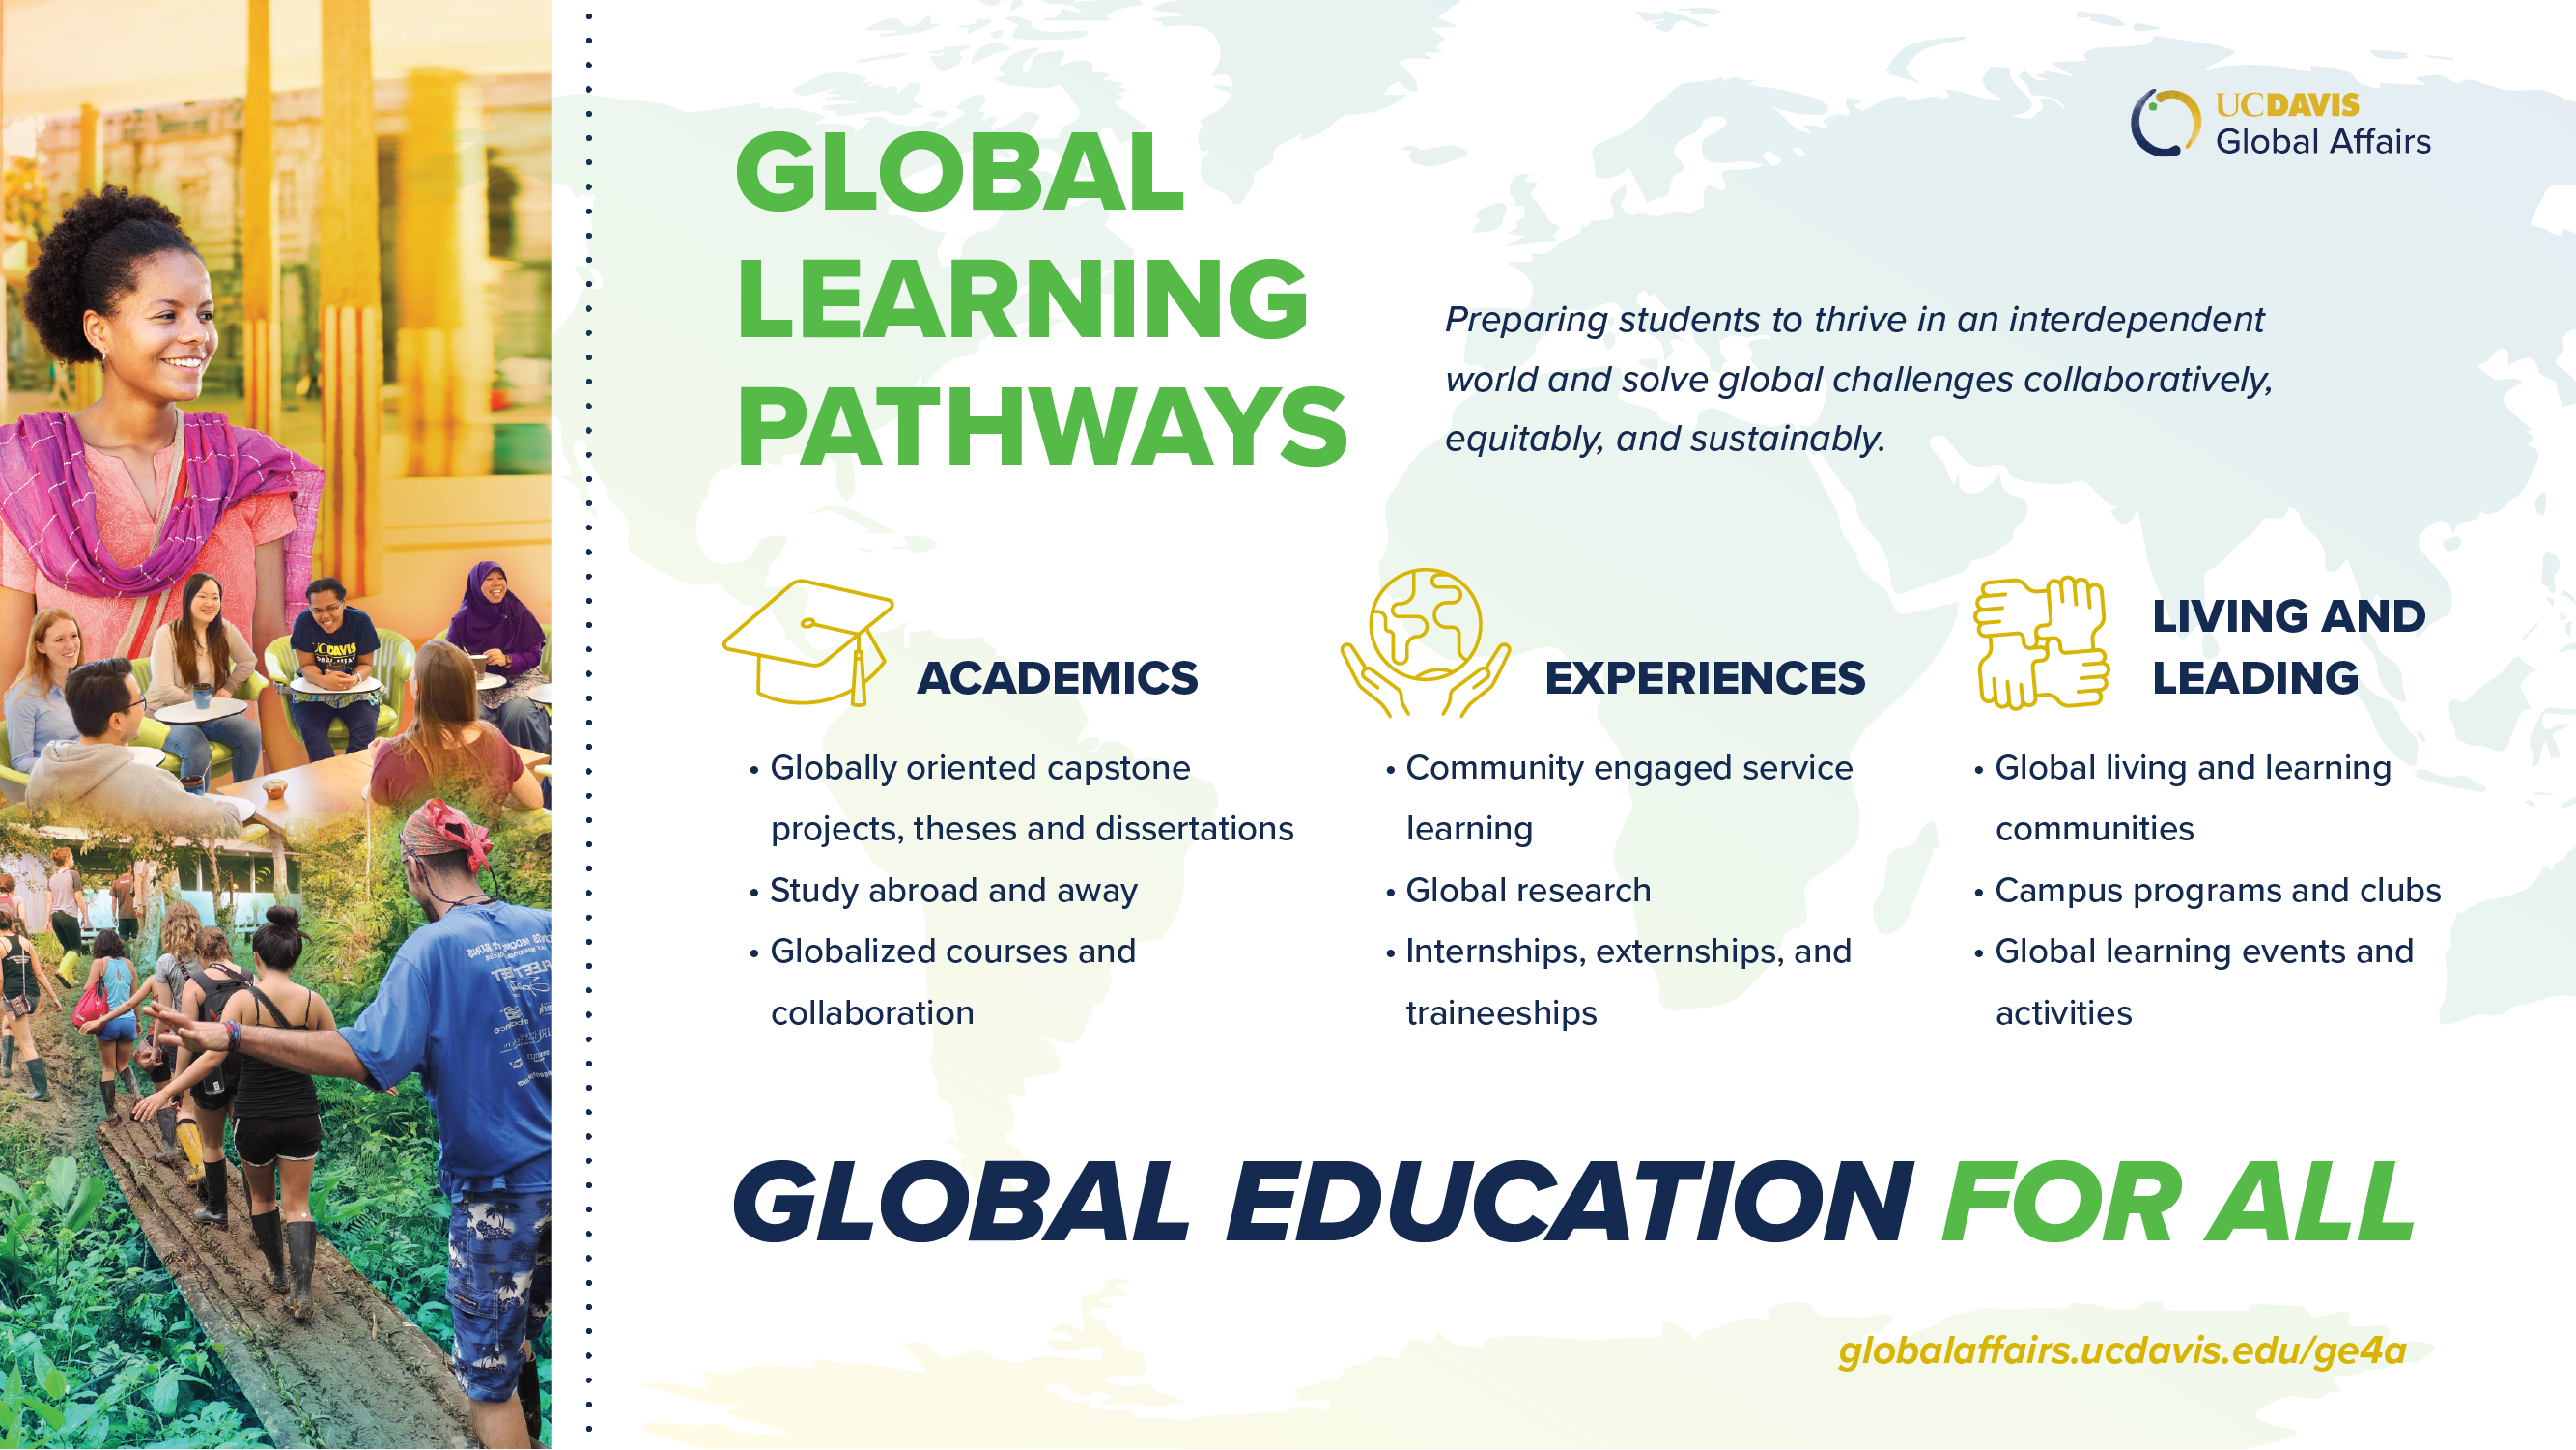 Graphic with text "Pathways for Global Learning"